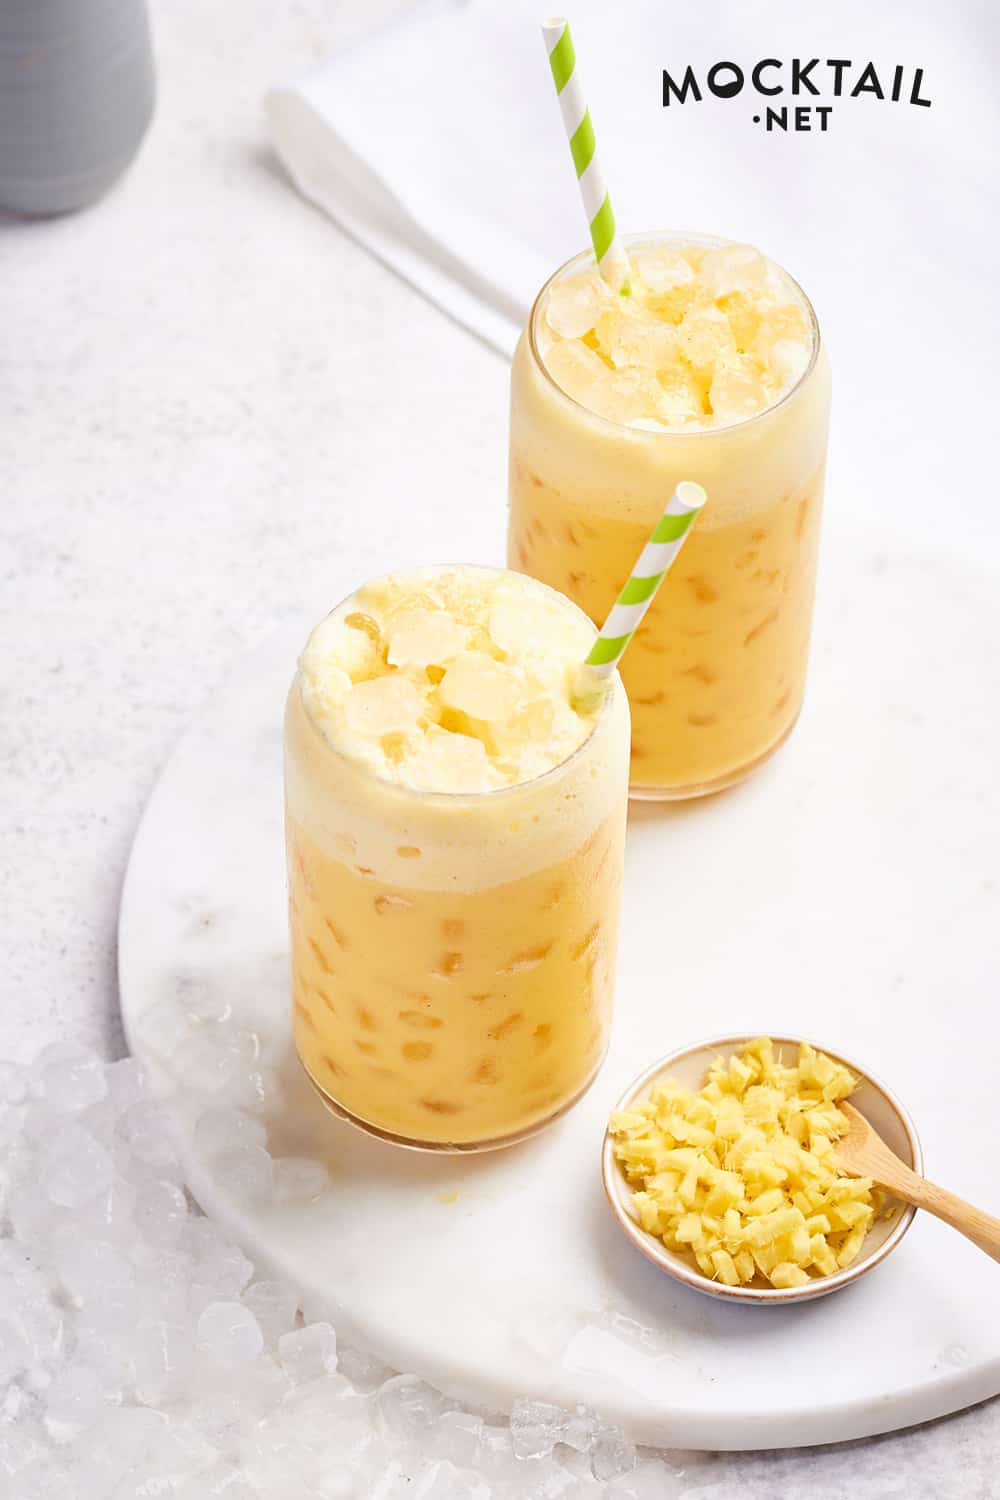 Our golden ginger drink is truly delicious.